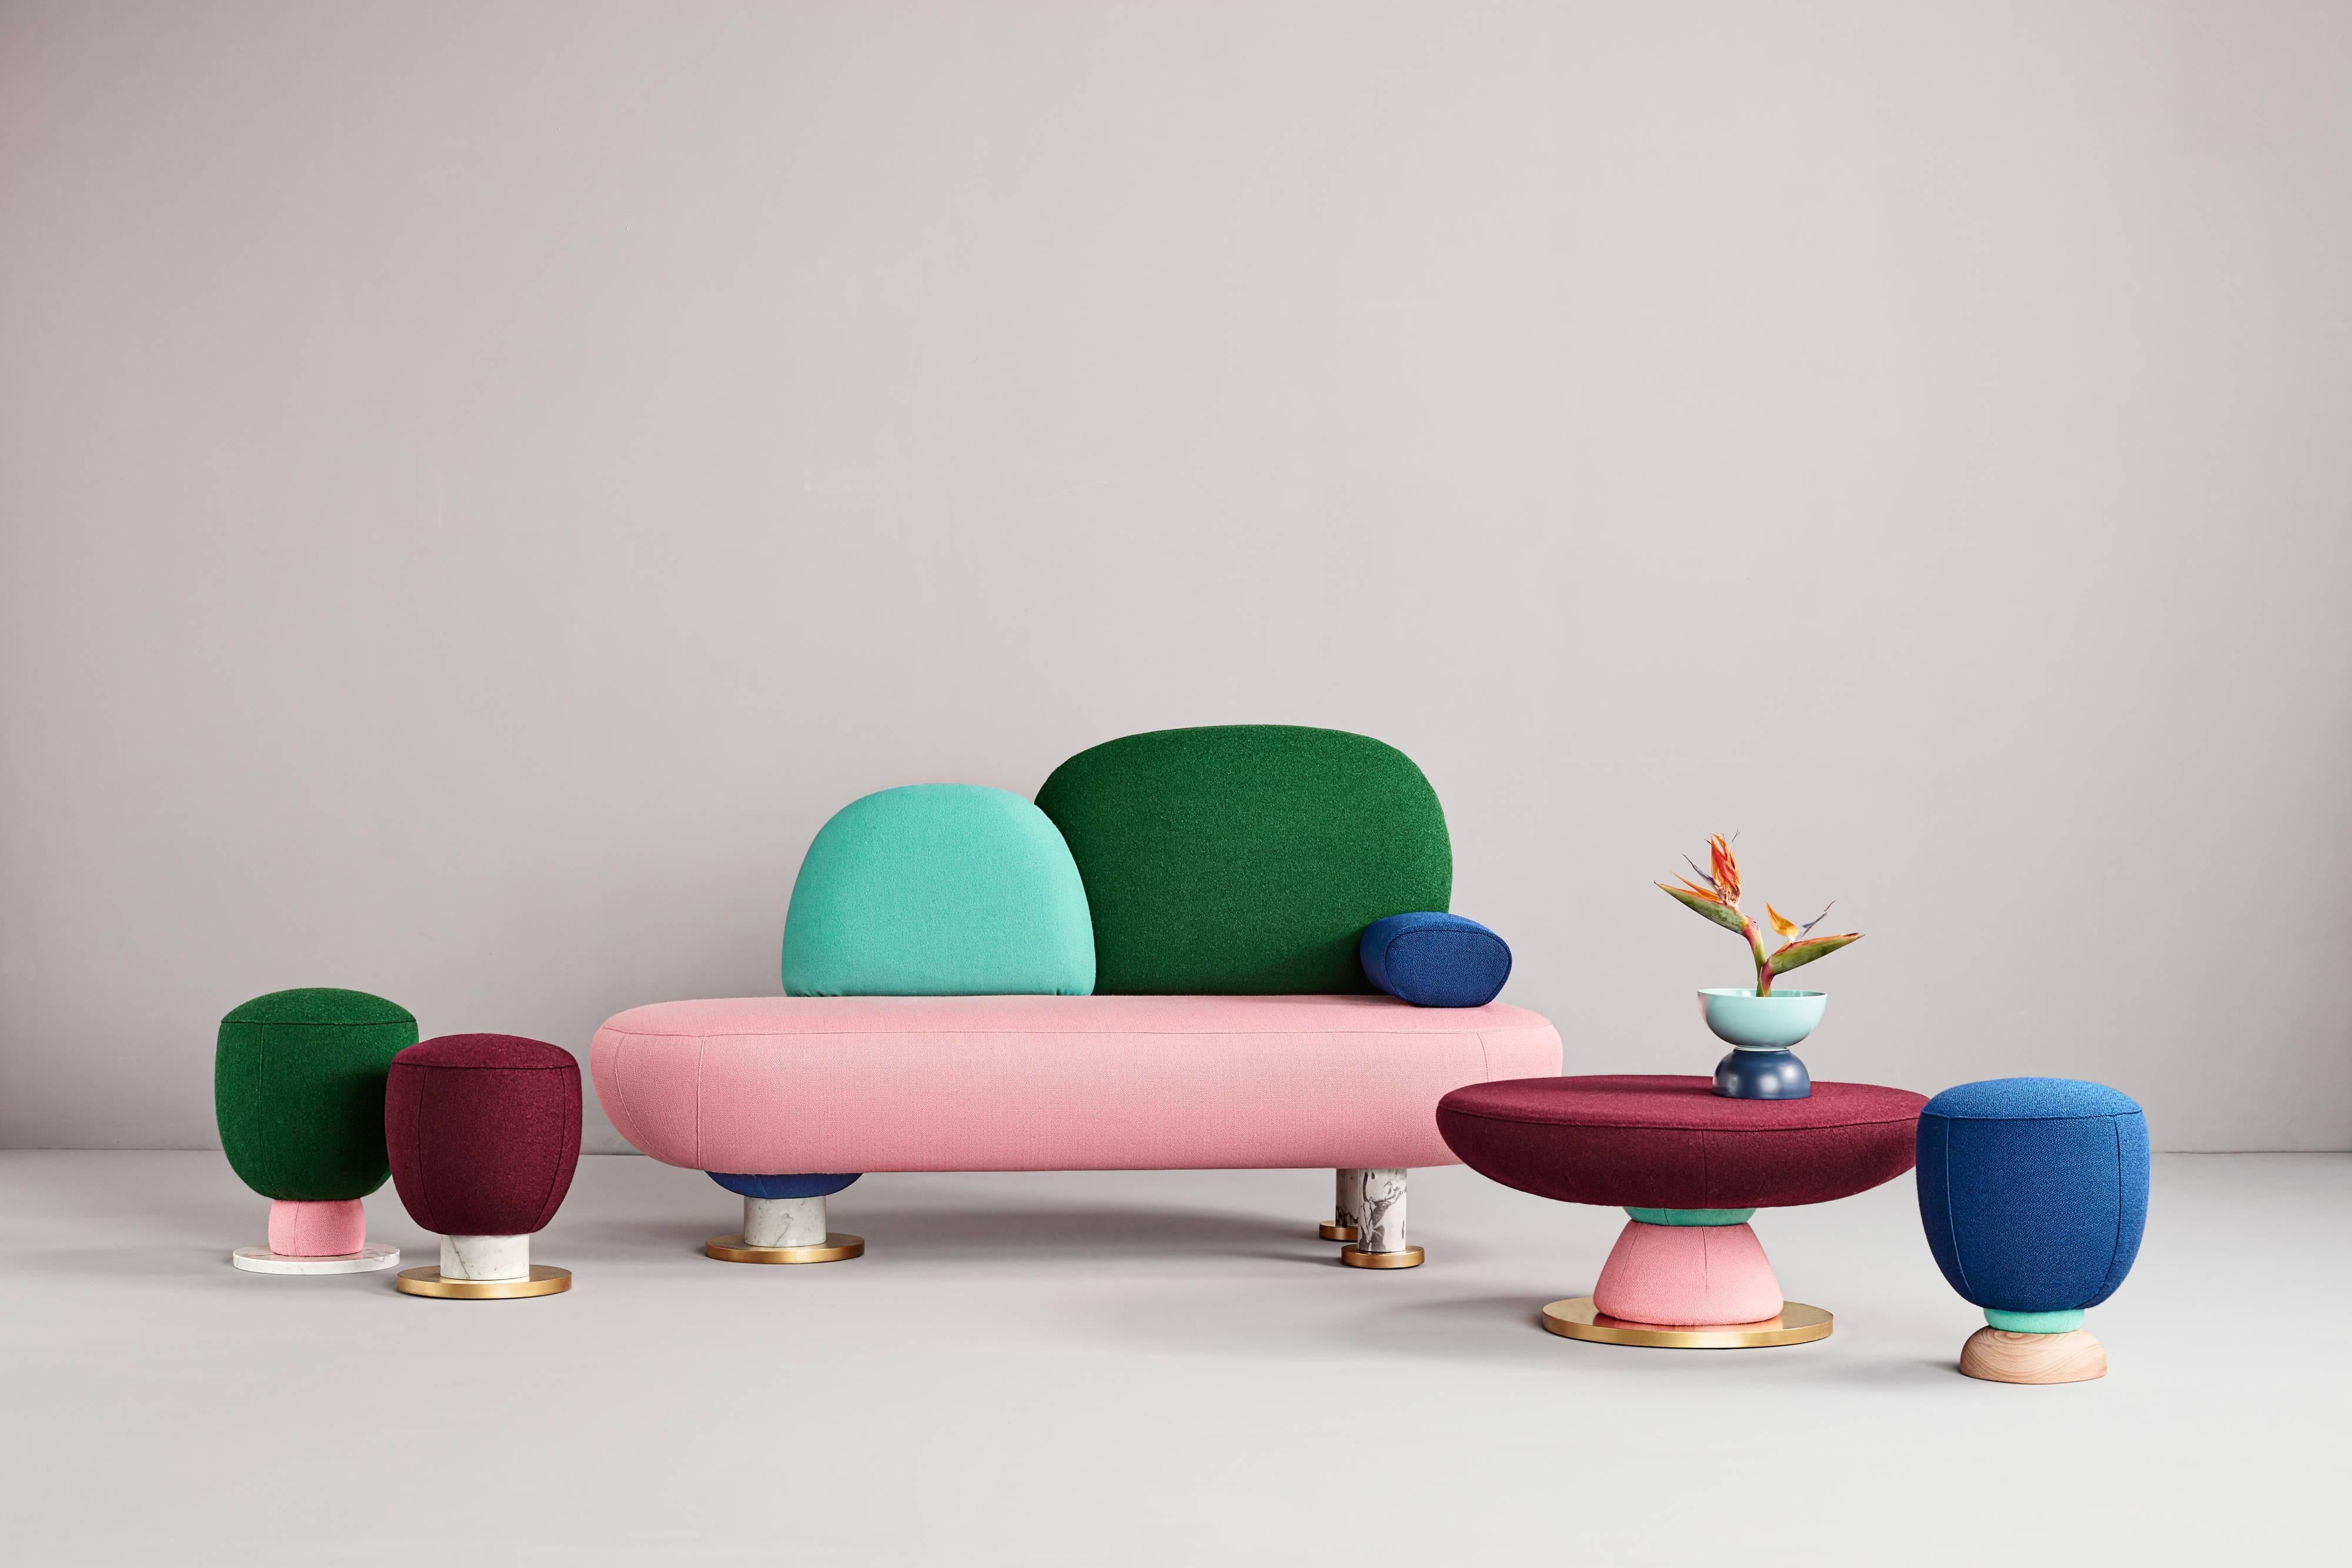 Toadstool collection, Blue Puff, Masquespacio

This collection of puffs, table and sofa bench designed by Masquespacio is inspired in the visual culture and graphic design always present one way
 or another in the creative consultancy projects.